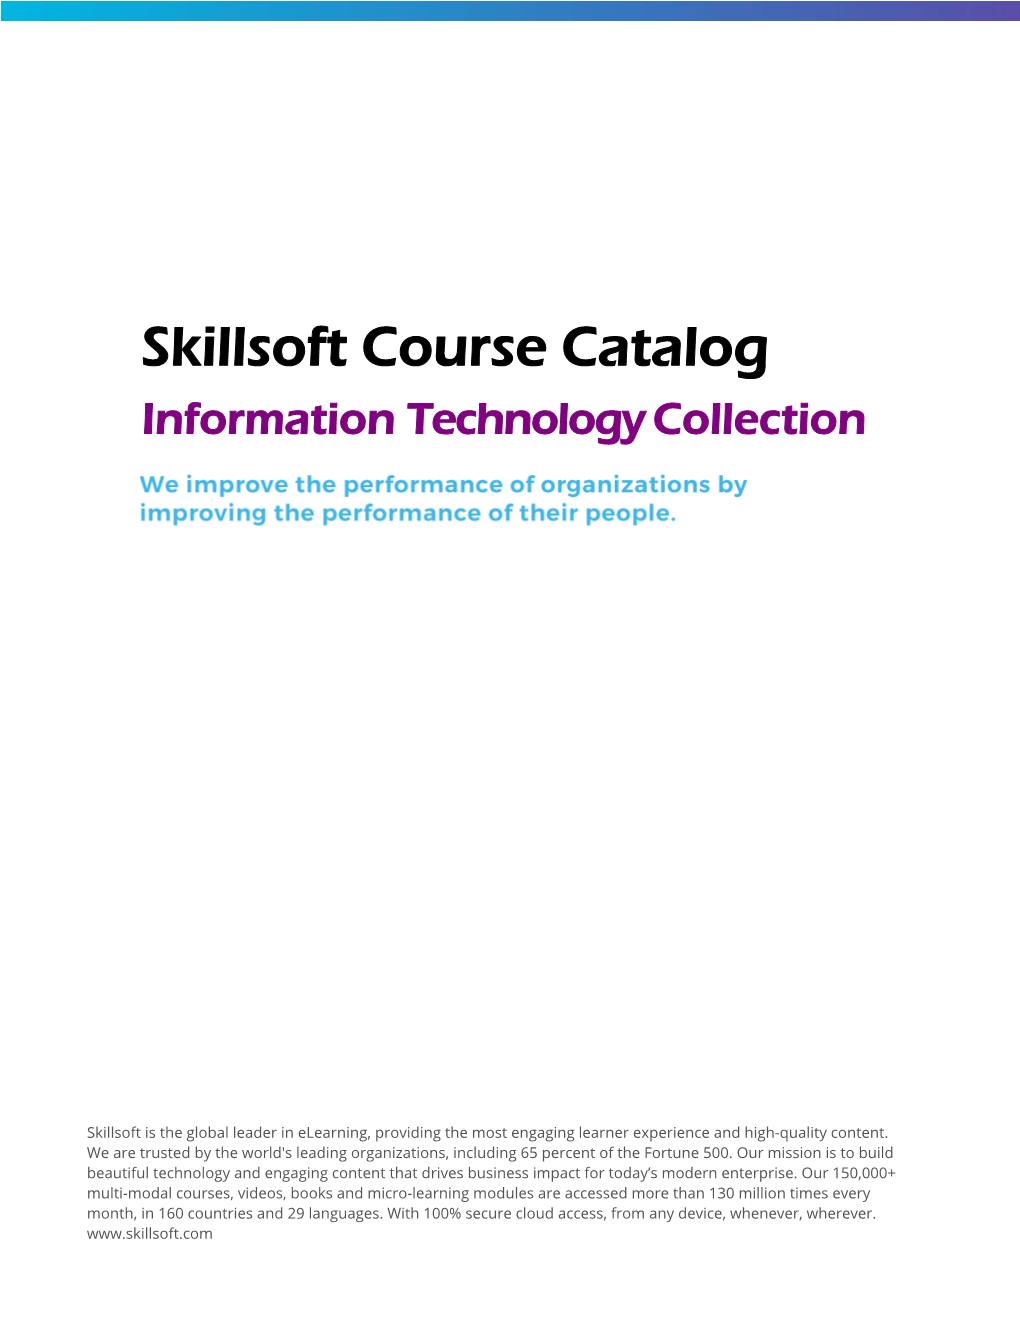 Skillsoft Course Catalog Information Technology Collection